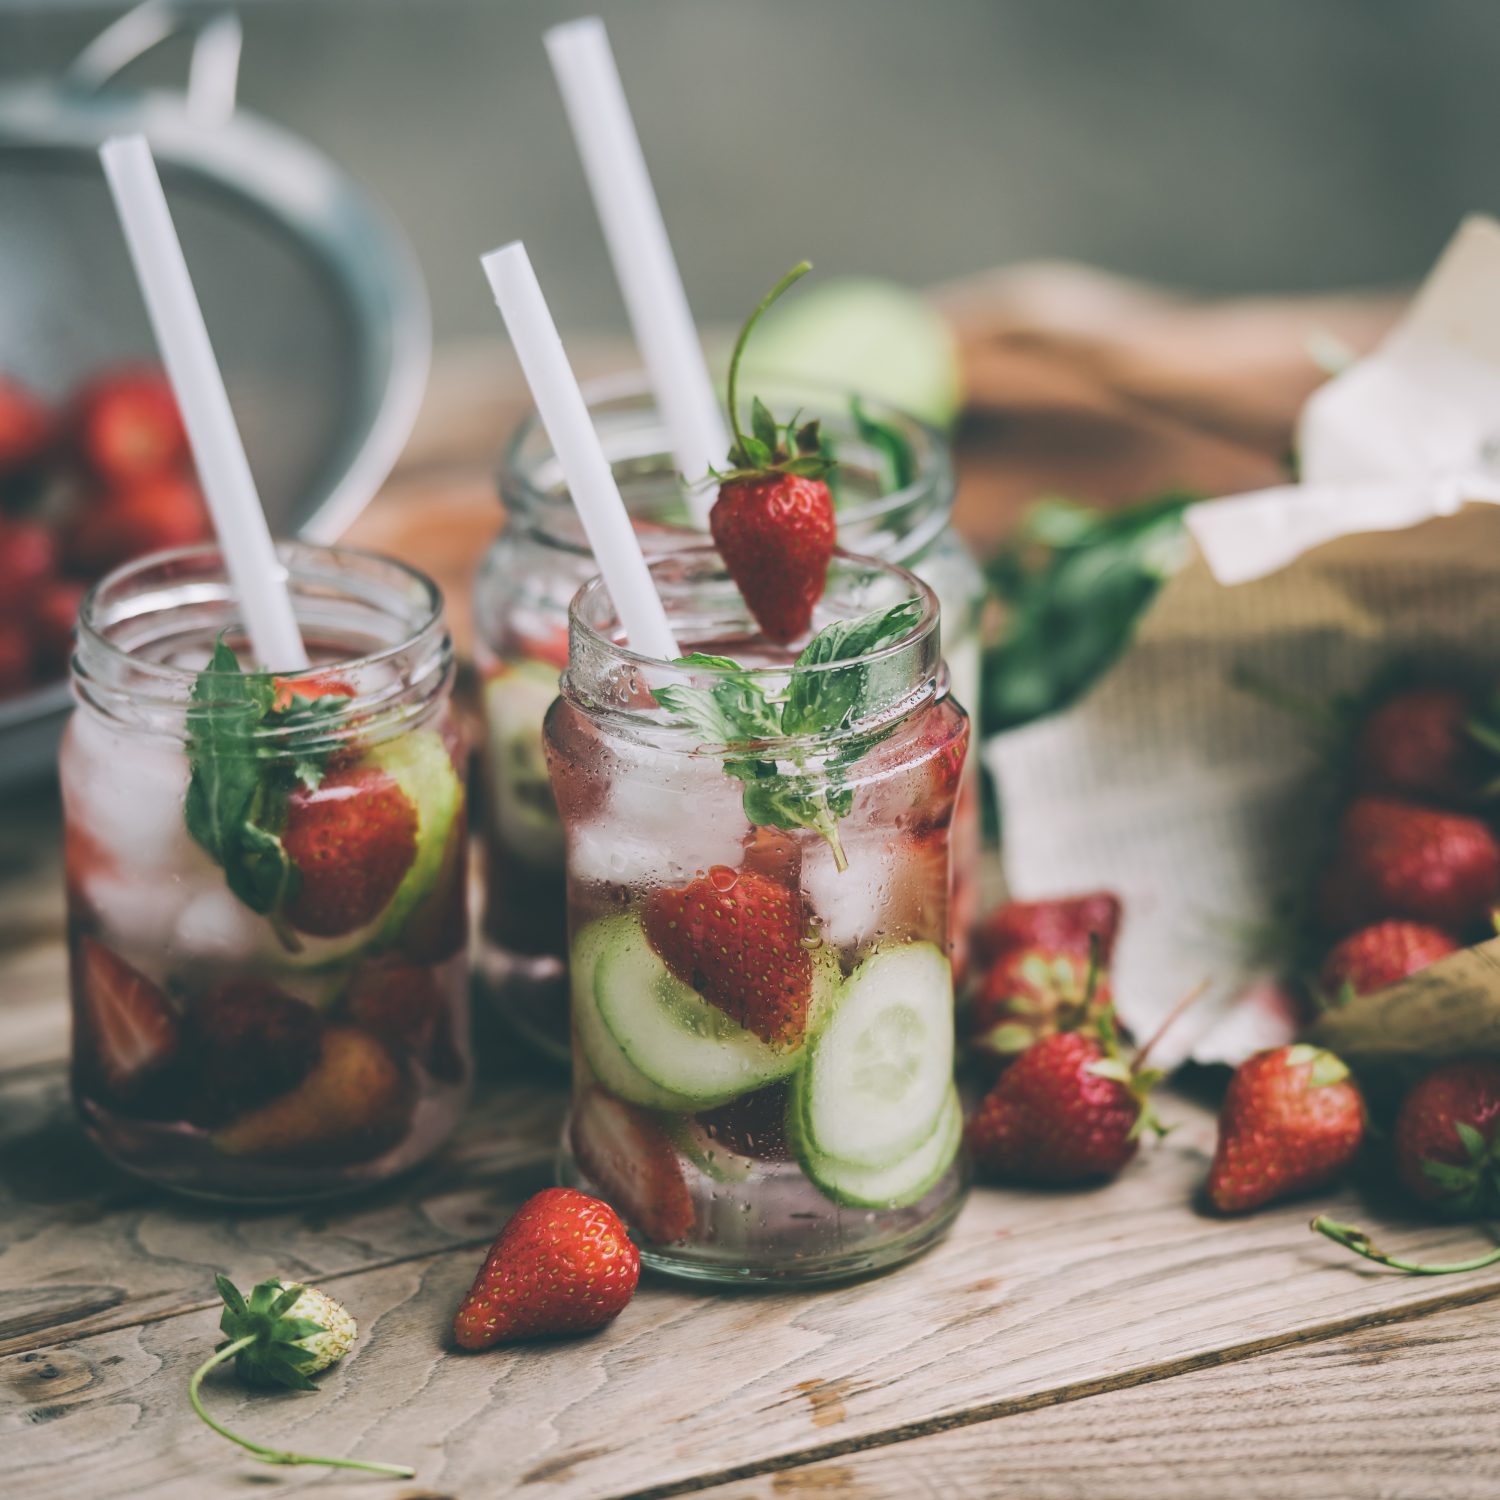 My favourite summer drink with added strawberries